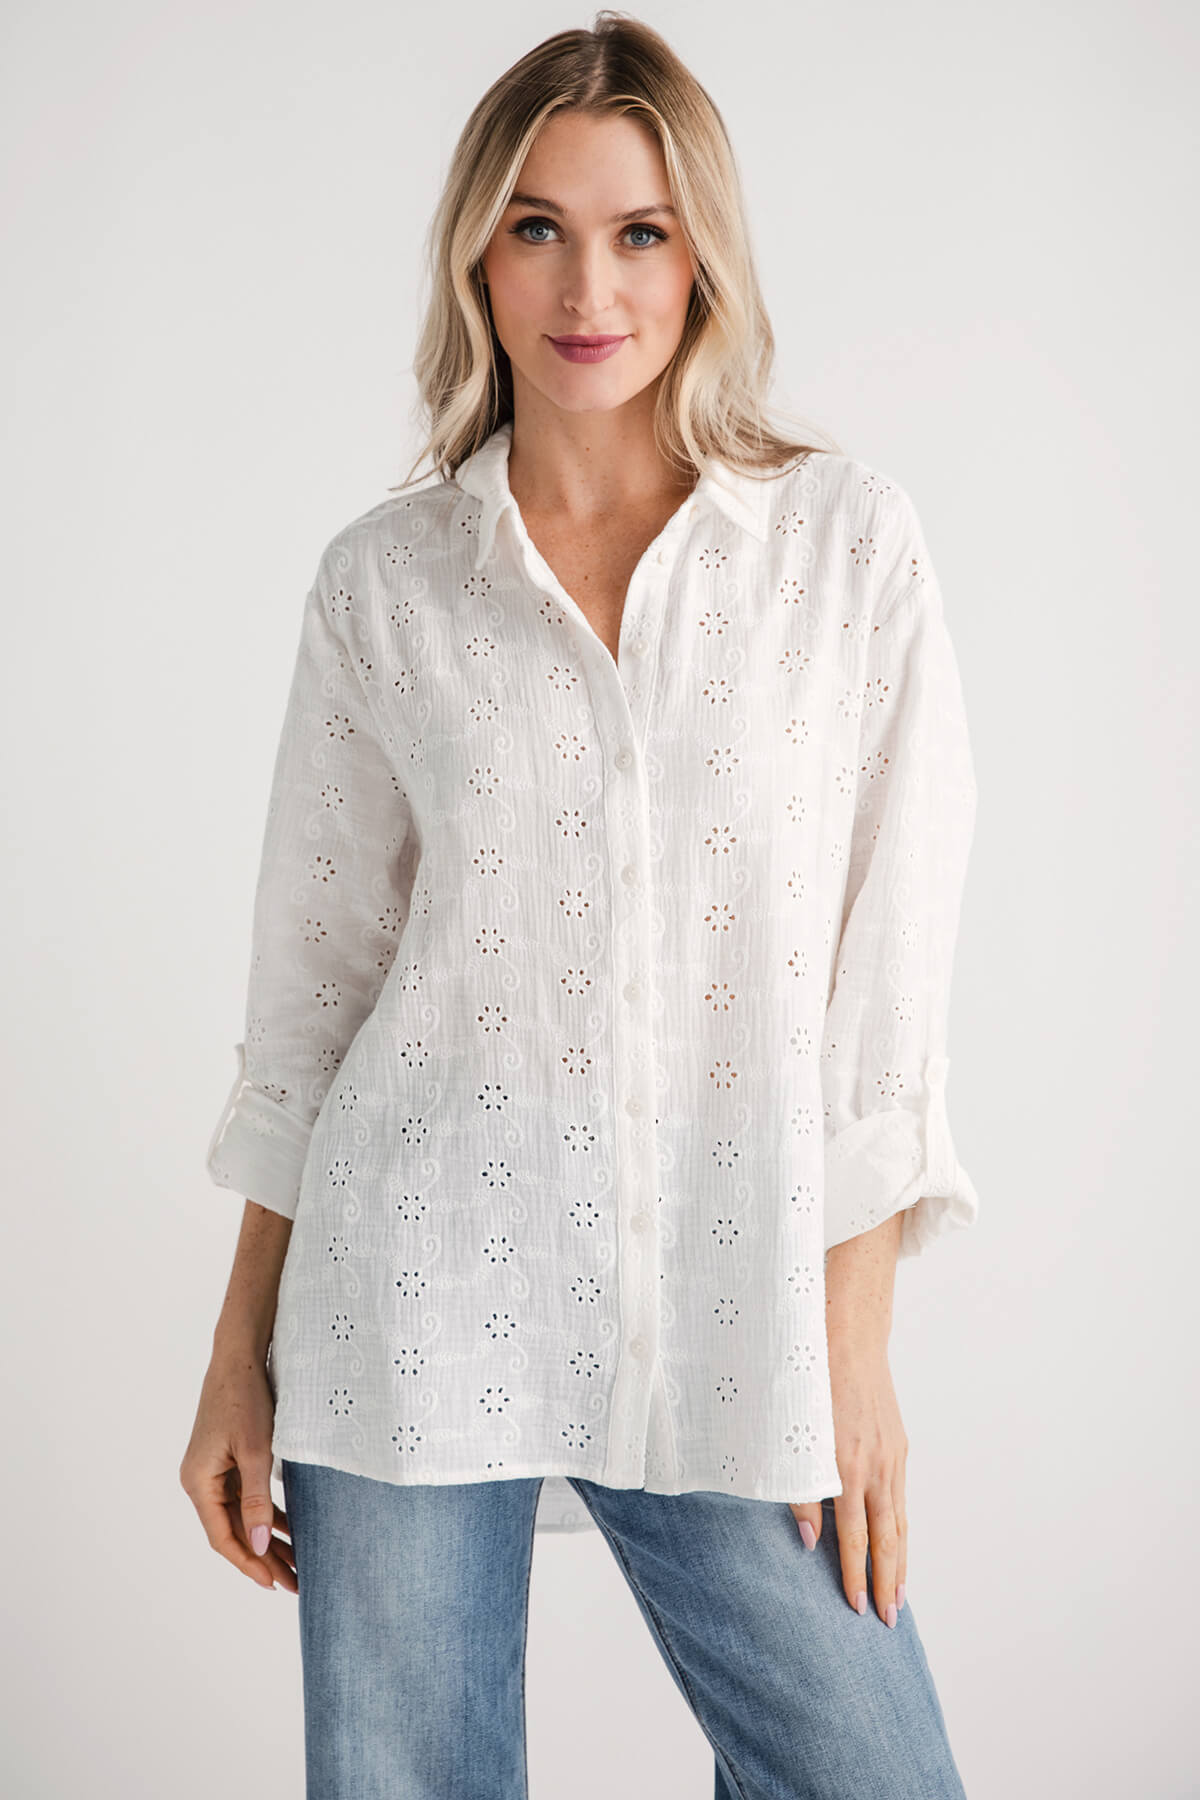 Lovestitch Eyelet Embroidered Button Down Top